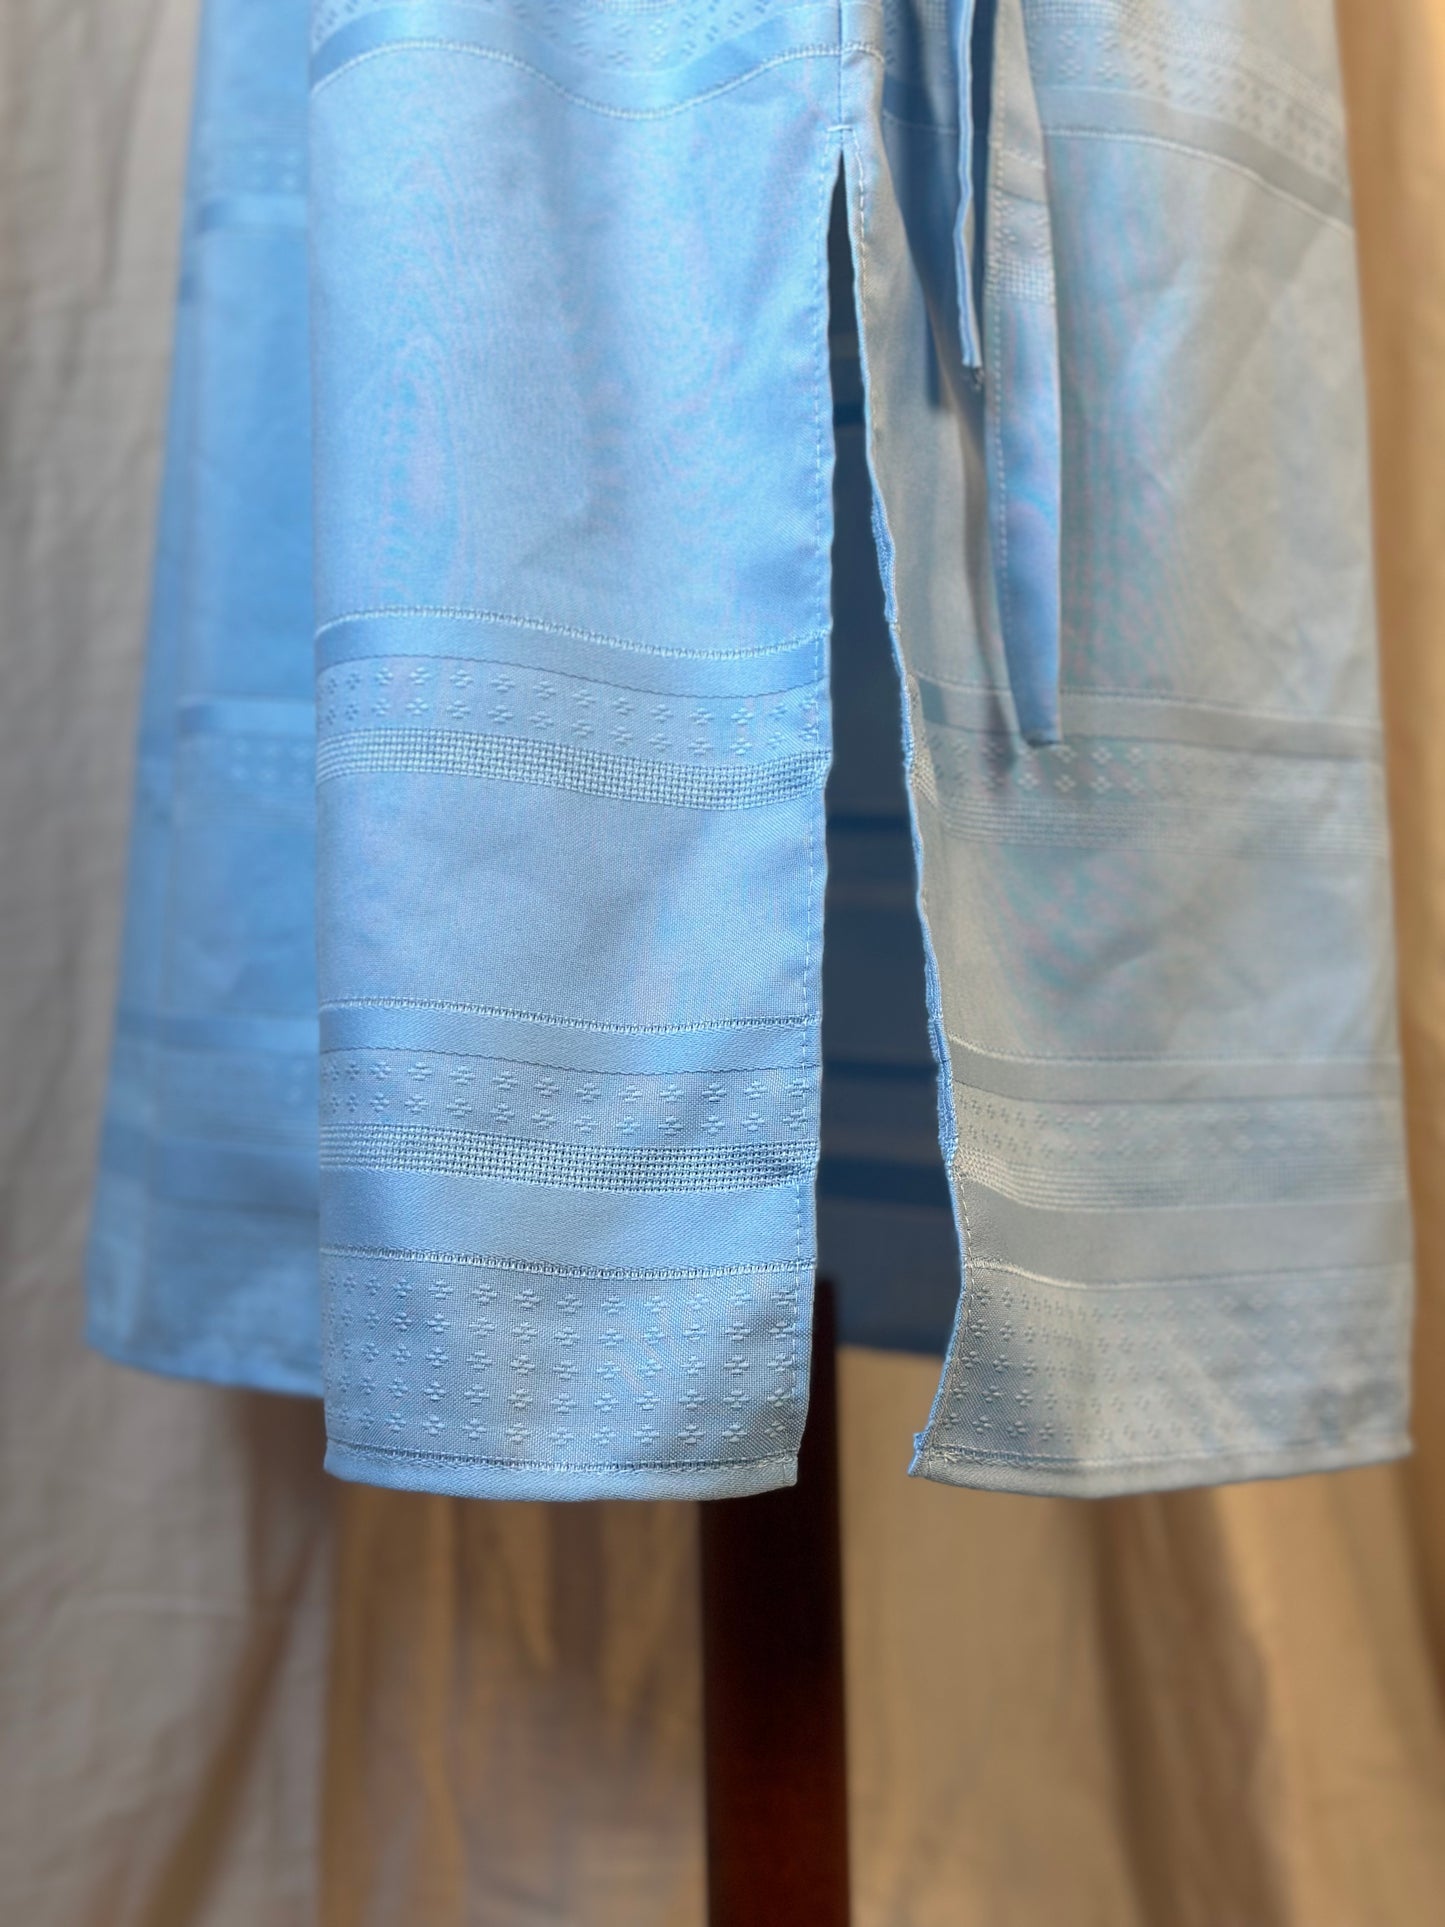 Baby Blue Button Up Set